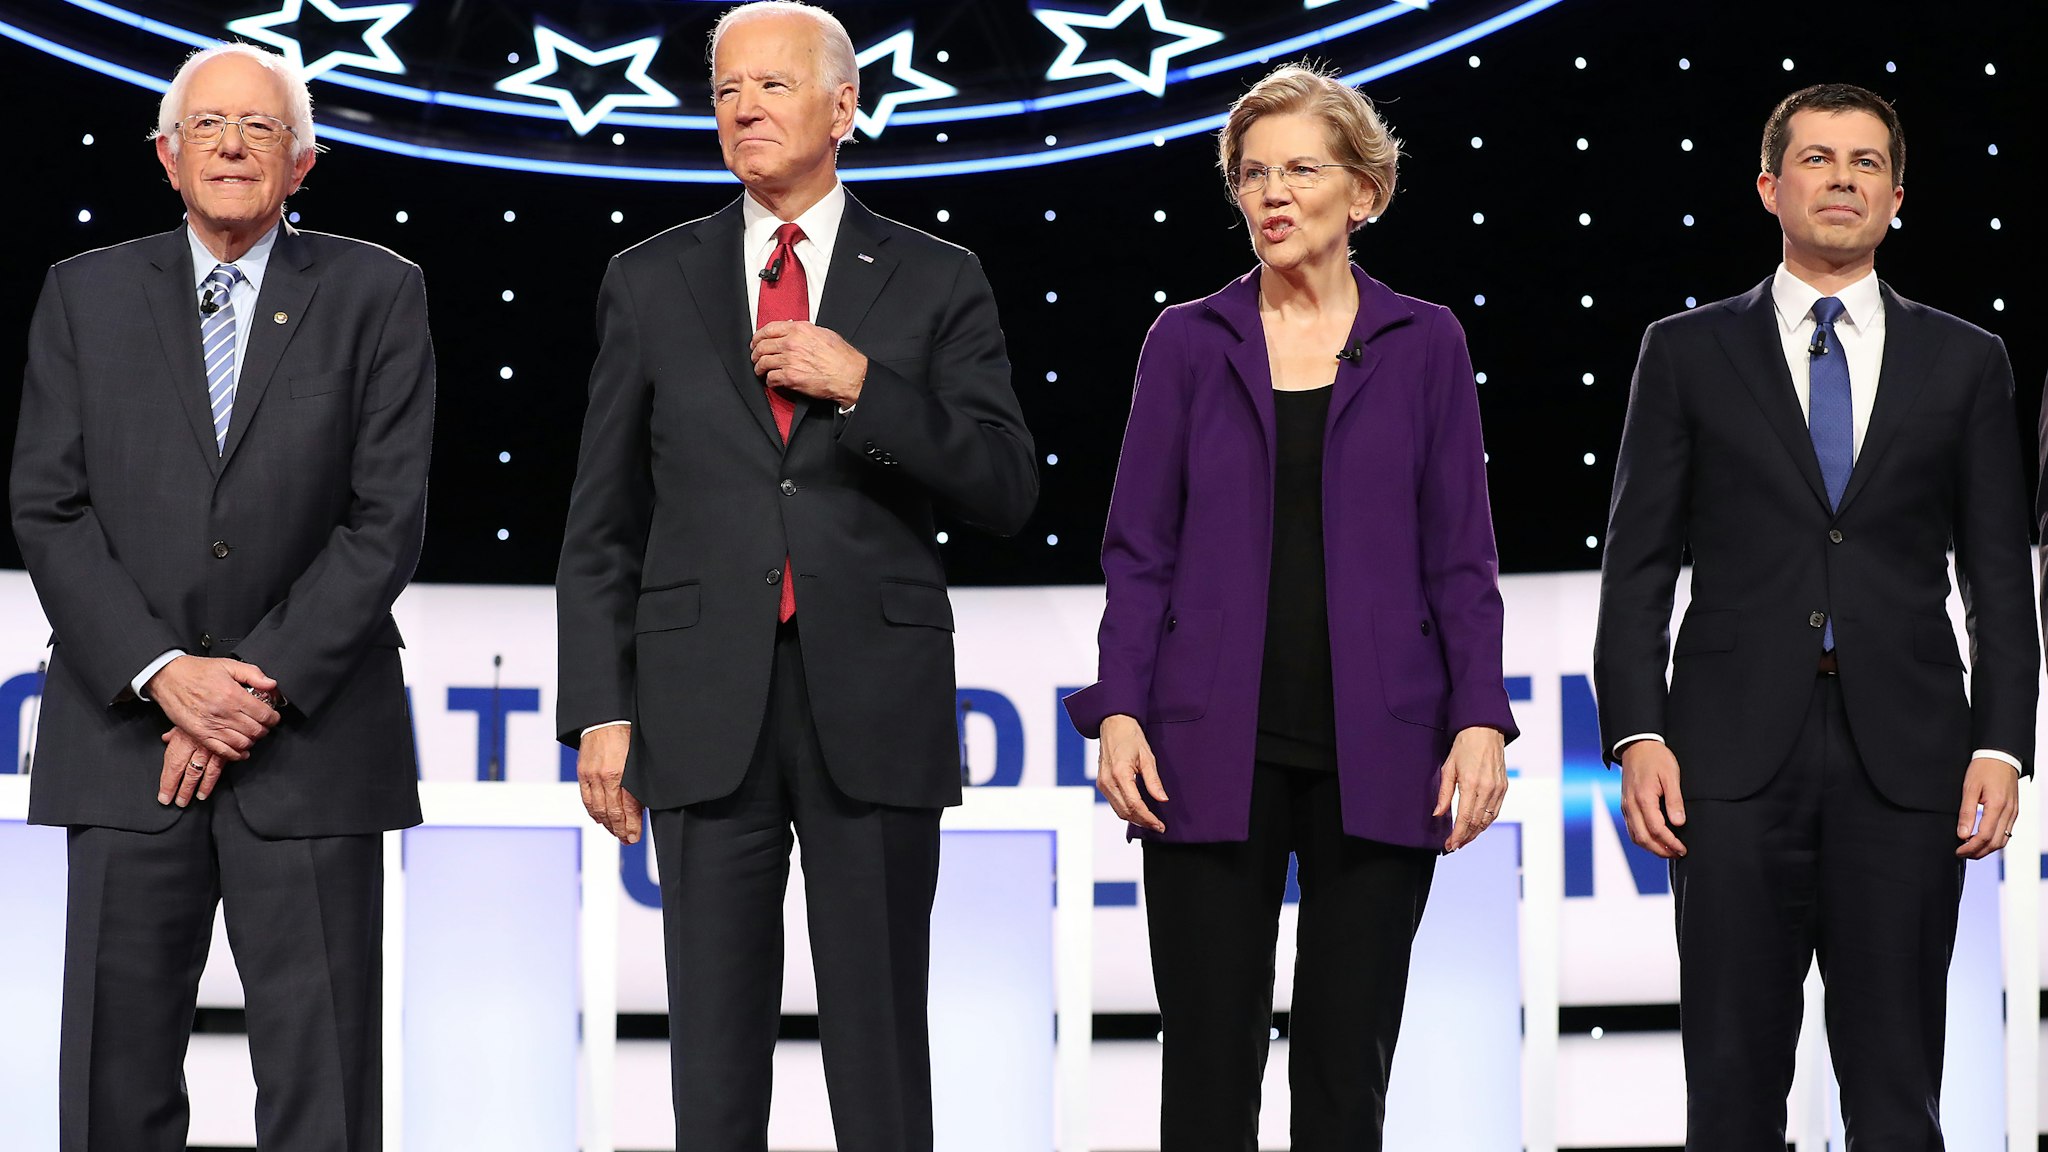 WESTERVILLE, OHIO - OCTOBER 15: Democratic presidential candidates (L-R) Sen. Bernie Sanders (I-VT), former Vice President Joe Biden, Sen. Elizabeth Warren (D-MA) and South Bend, Indiana Mayor Pete Buttigieg at the start of the Democratic Presidential Debate at Otterbein University on October 15, 2019 in Westerville, Ohio. A record 12 presidential hopefuls are participating in the debate hosted by CNN and The New York Times. (Photo by Chip Somodevilla/Getty Images)